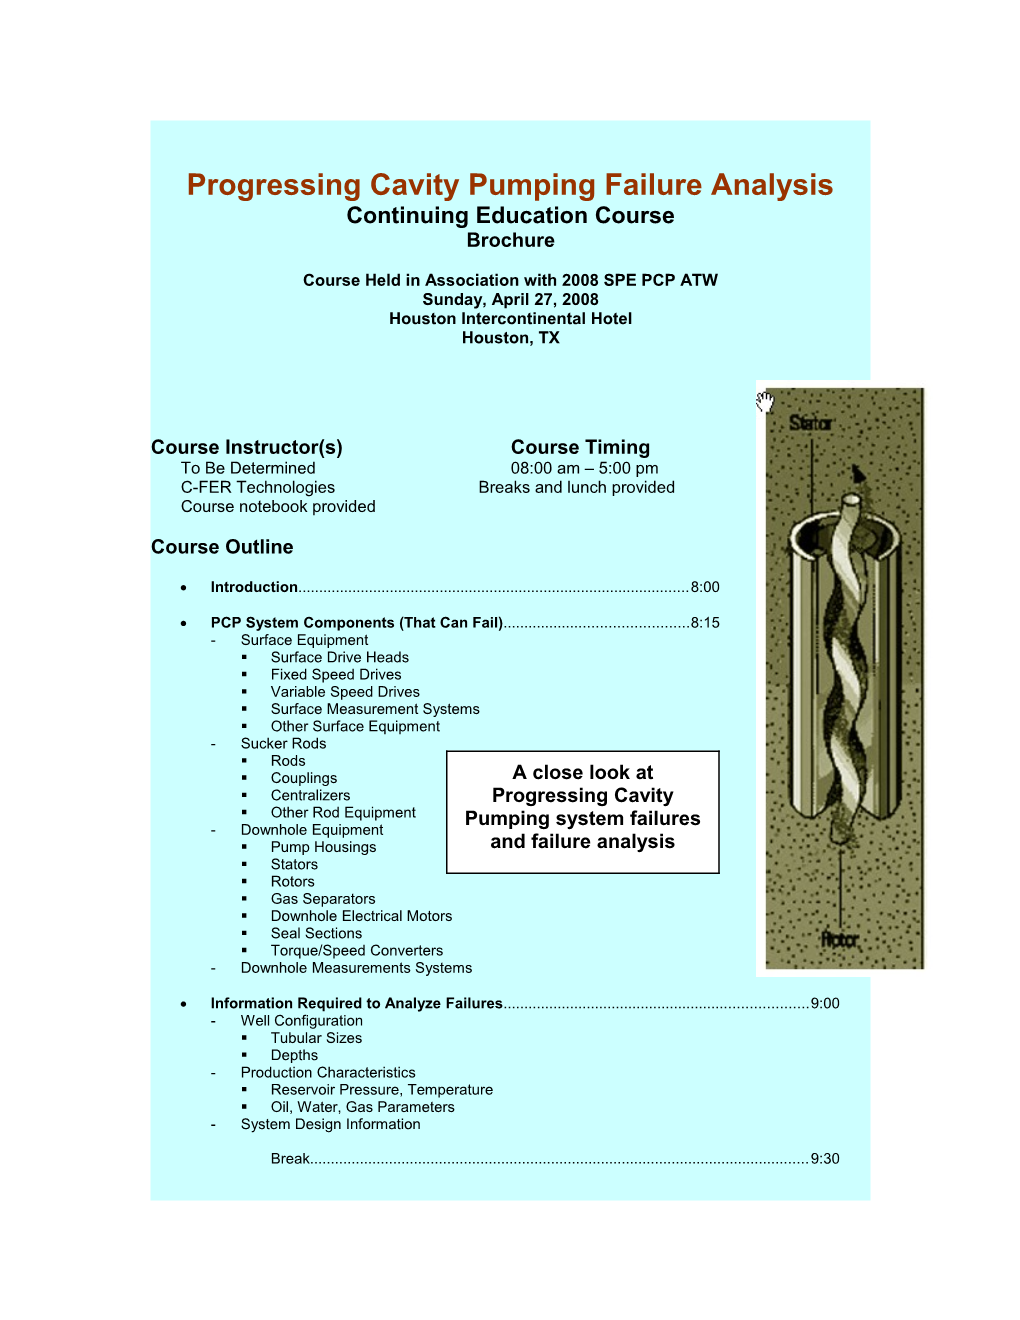 PCP Failure Analysis Course Outlinepage 1